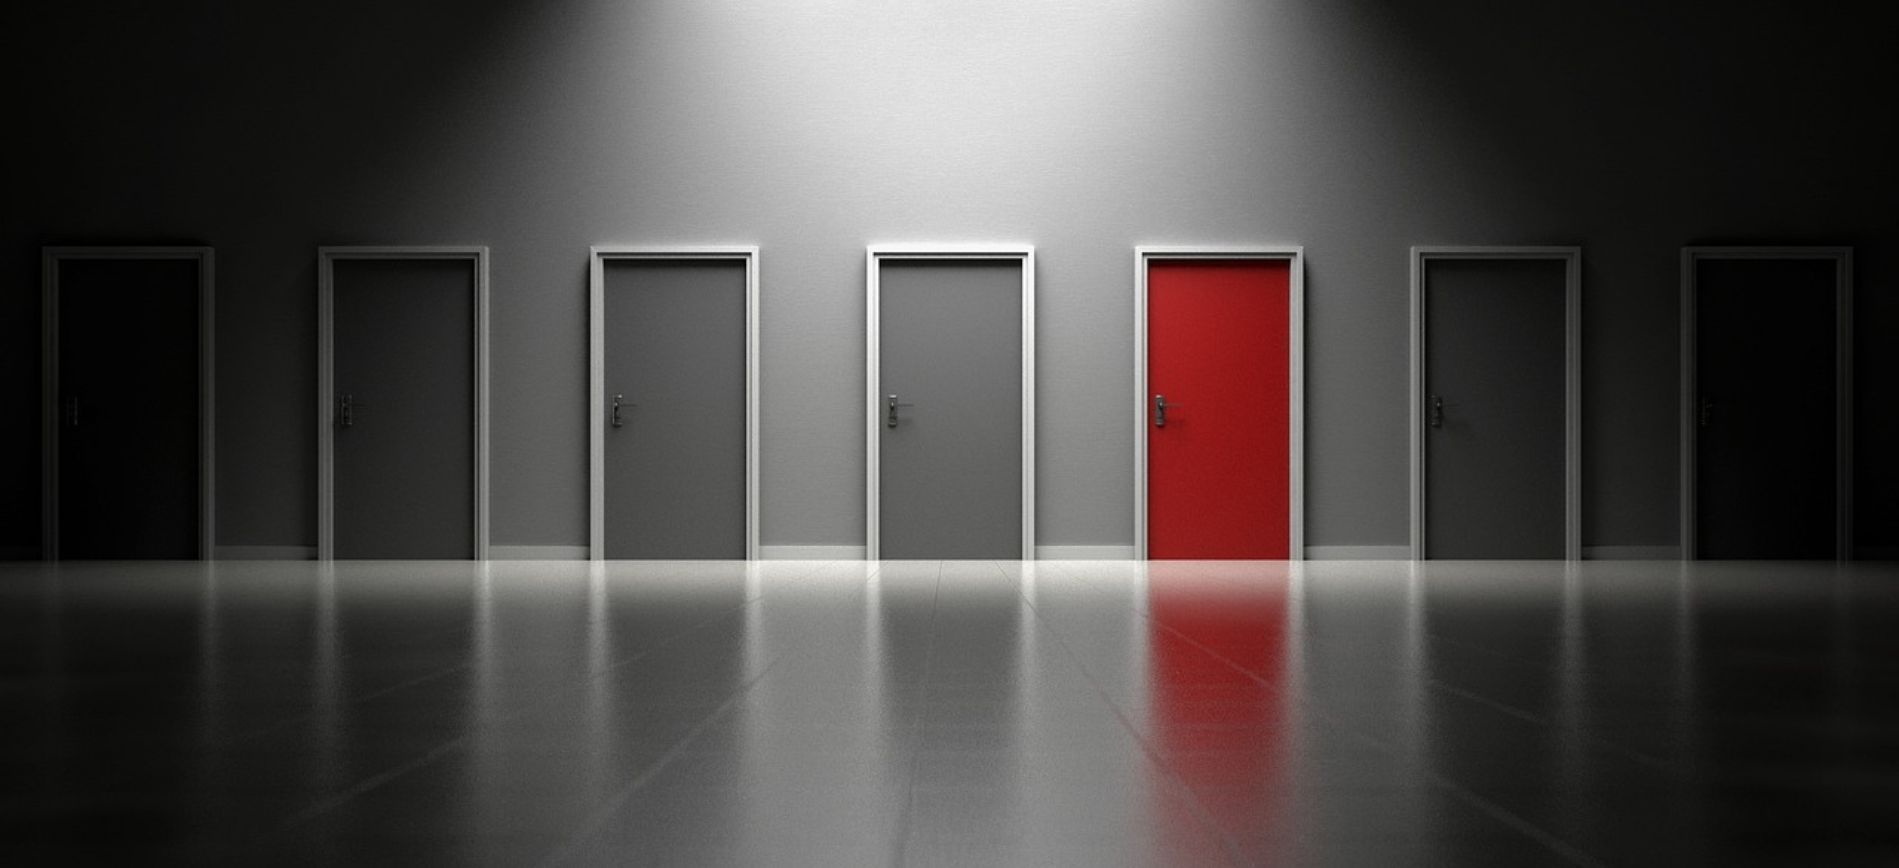 An image of a row of doors in black and white with one red door